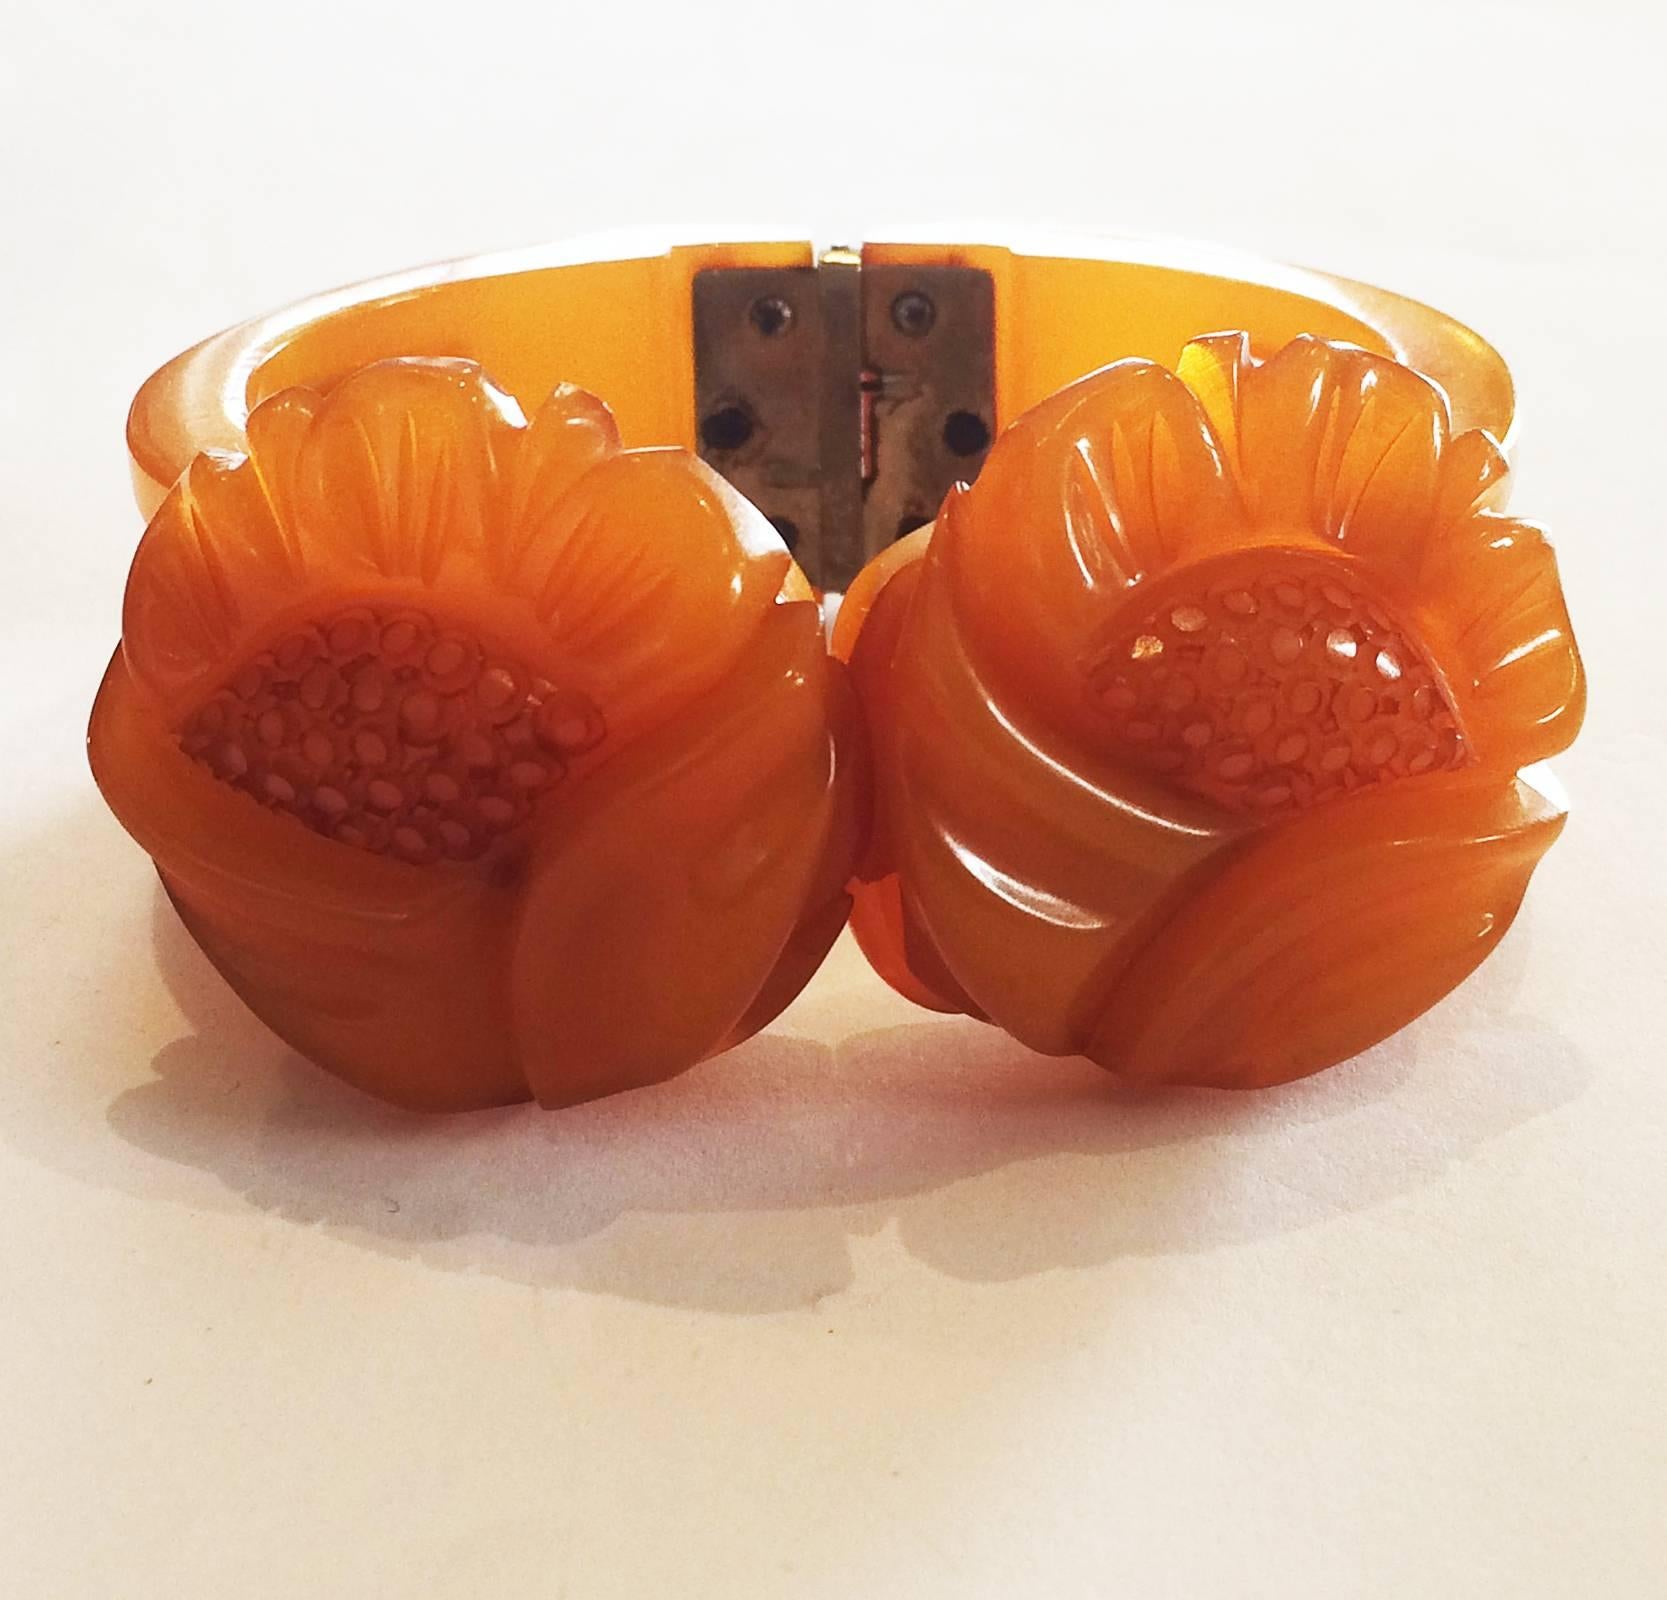 Art Deco Clamper, deeply Carved Bakelite Bangle in a Honeyed orange colour, with full depth, slotted band to each side, together with a large Daisy at each side of the opening. Each Daisy also rotates so the decoration can be changed at will. An